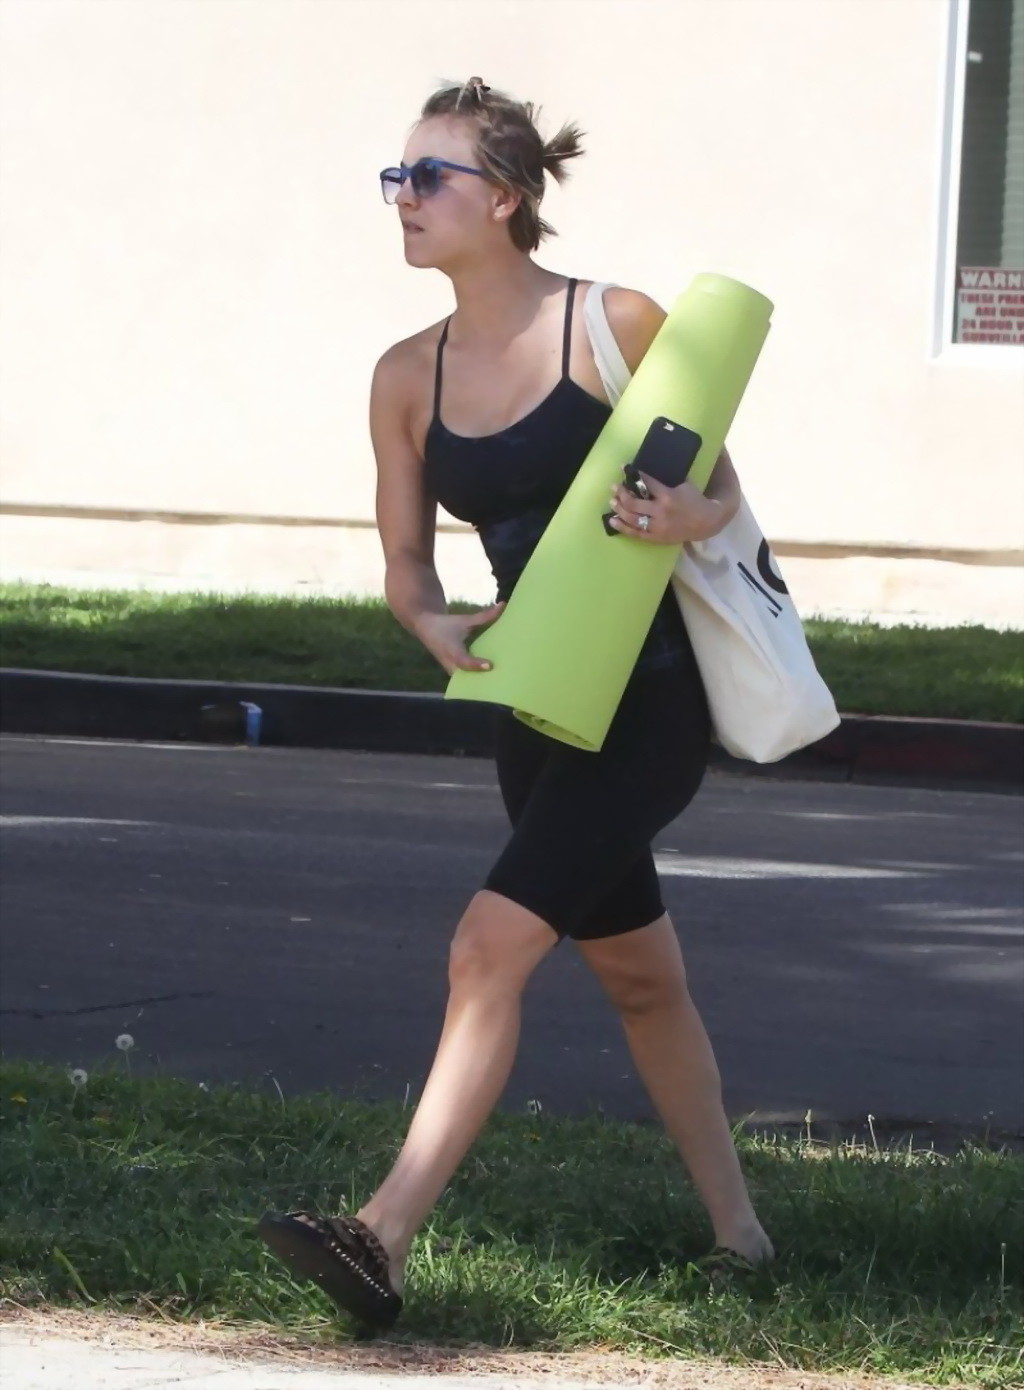 Kaley Cuoco Busty And Booty In Tiny Top And Leggings Leaving A Yoga Class In She